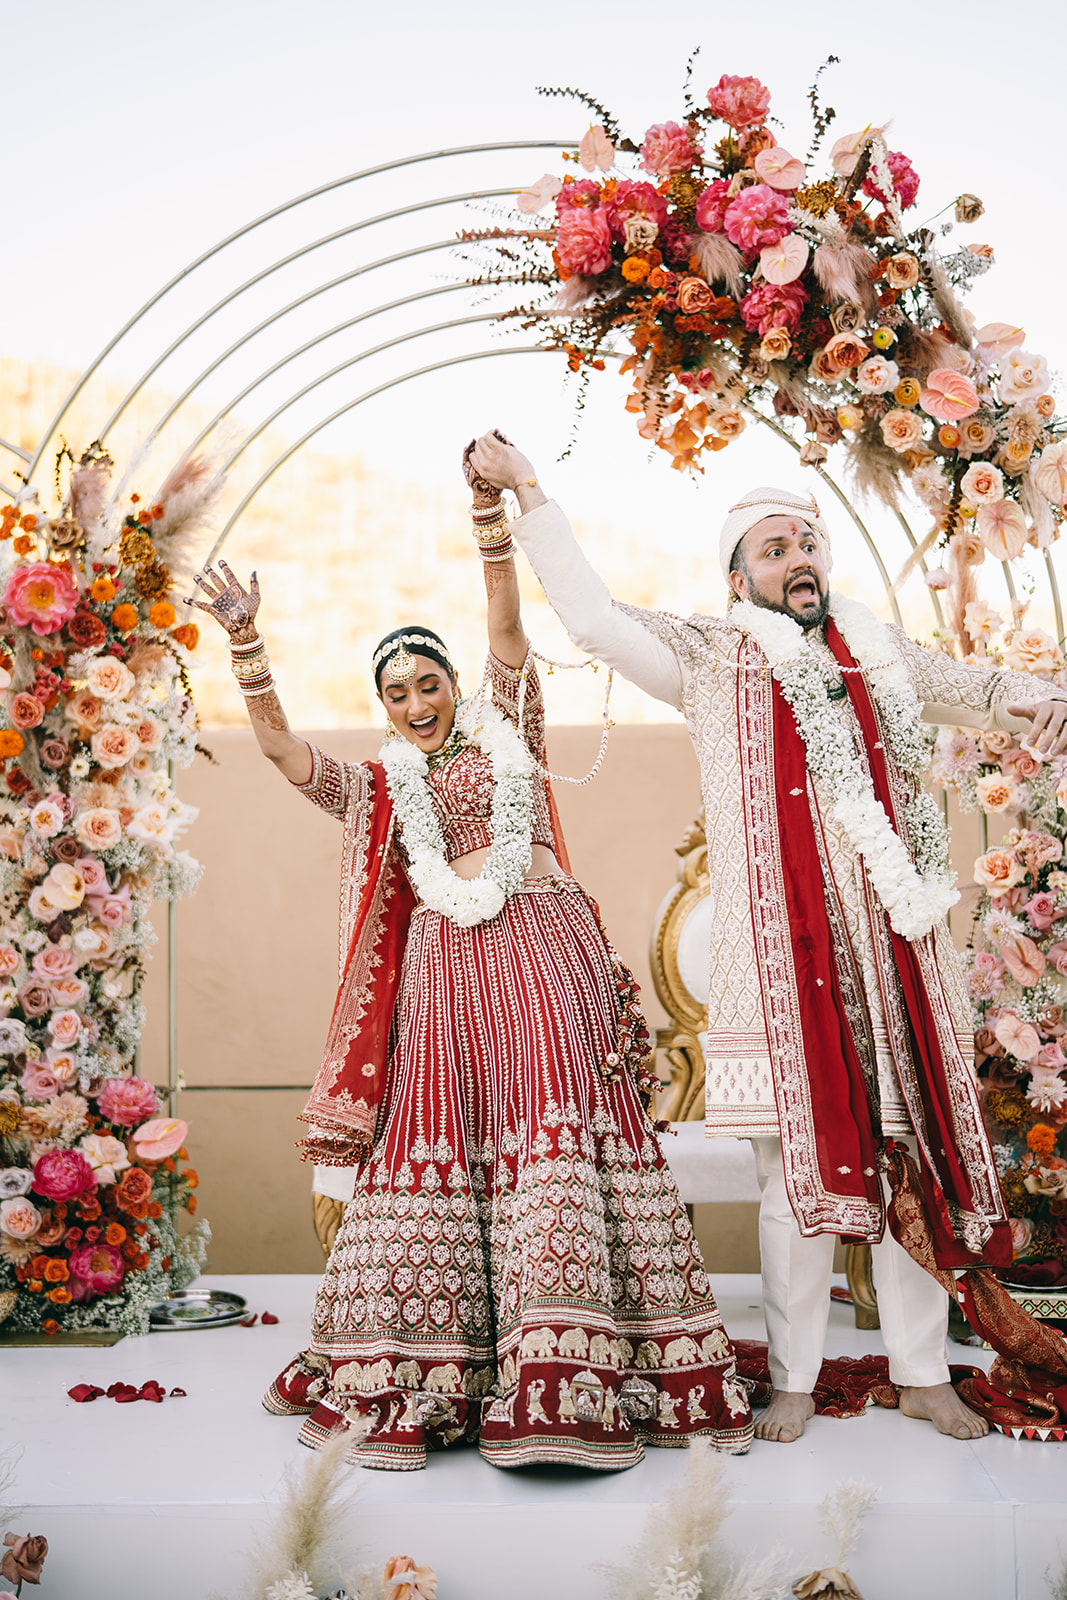 Bride and groom with their hands thrown in the air in celebration under flower arch